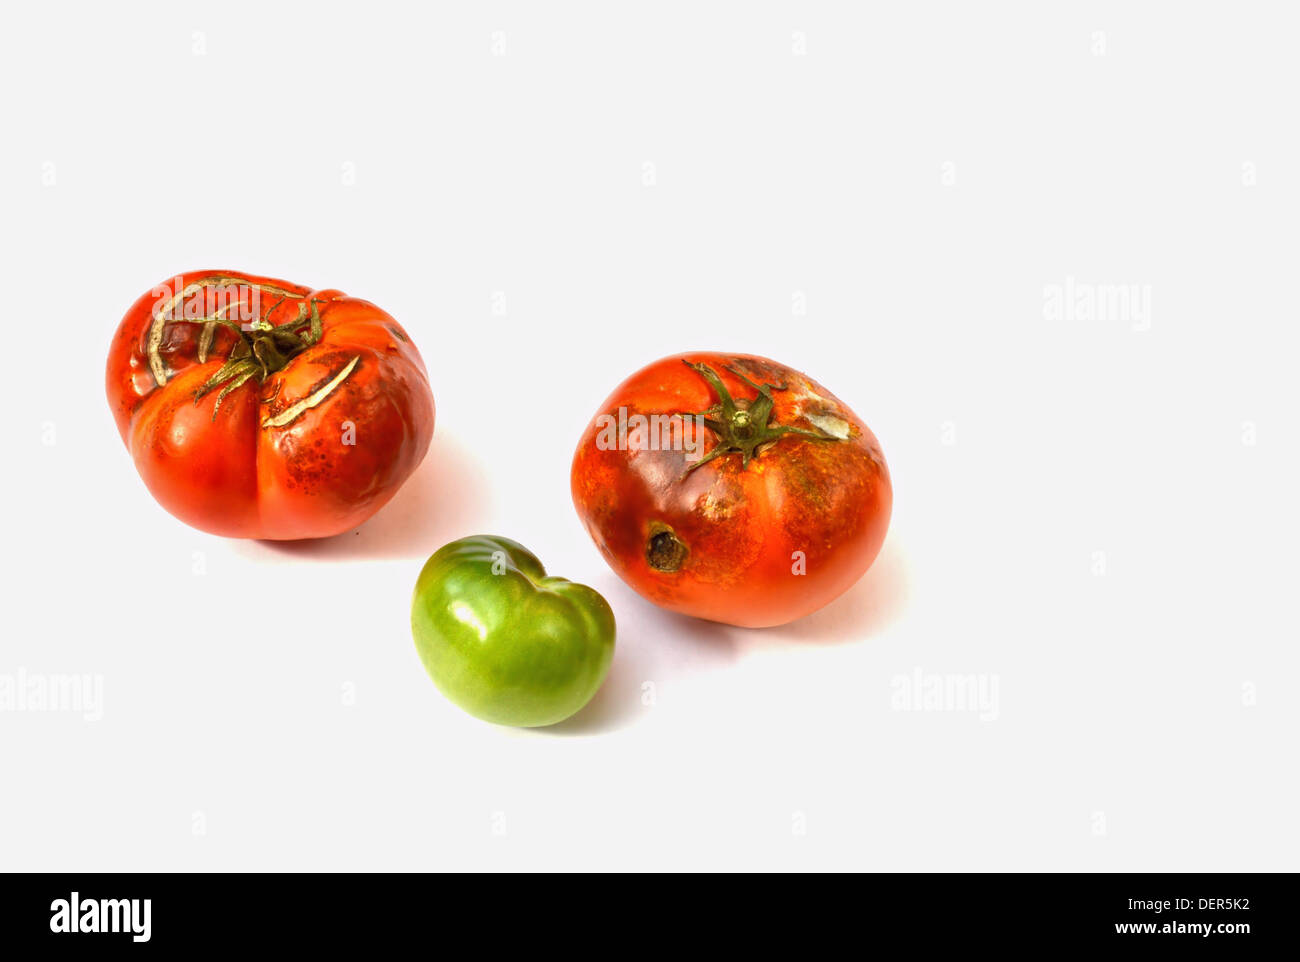 Red - Rotten Tomatoes